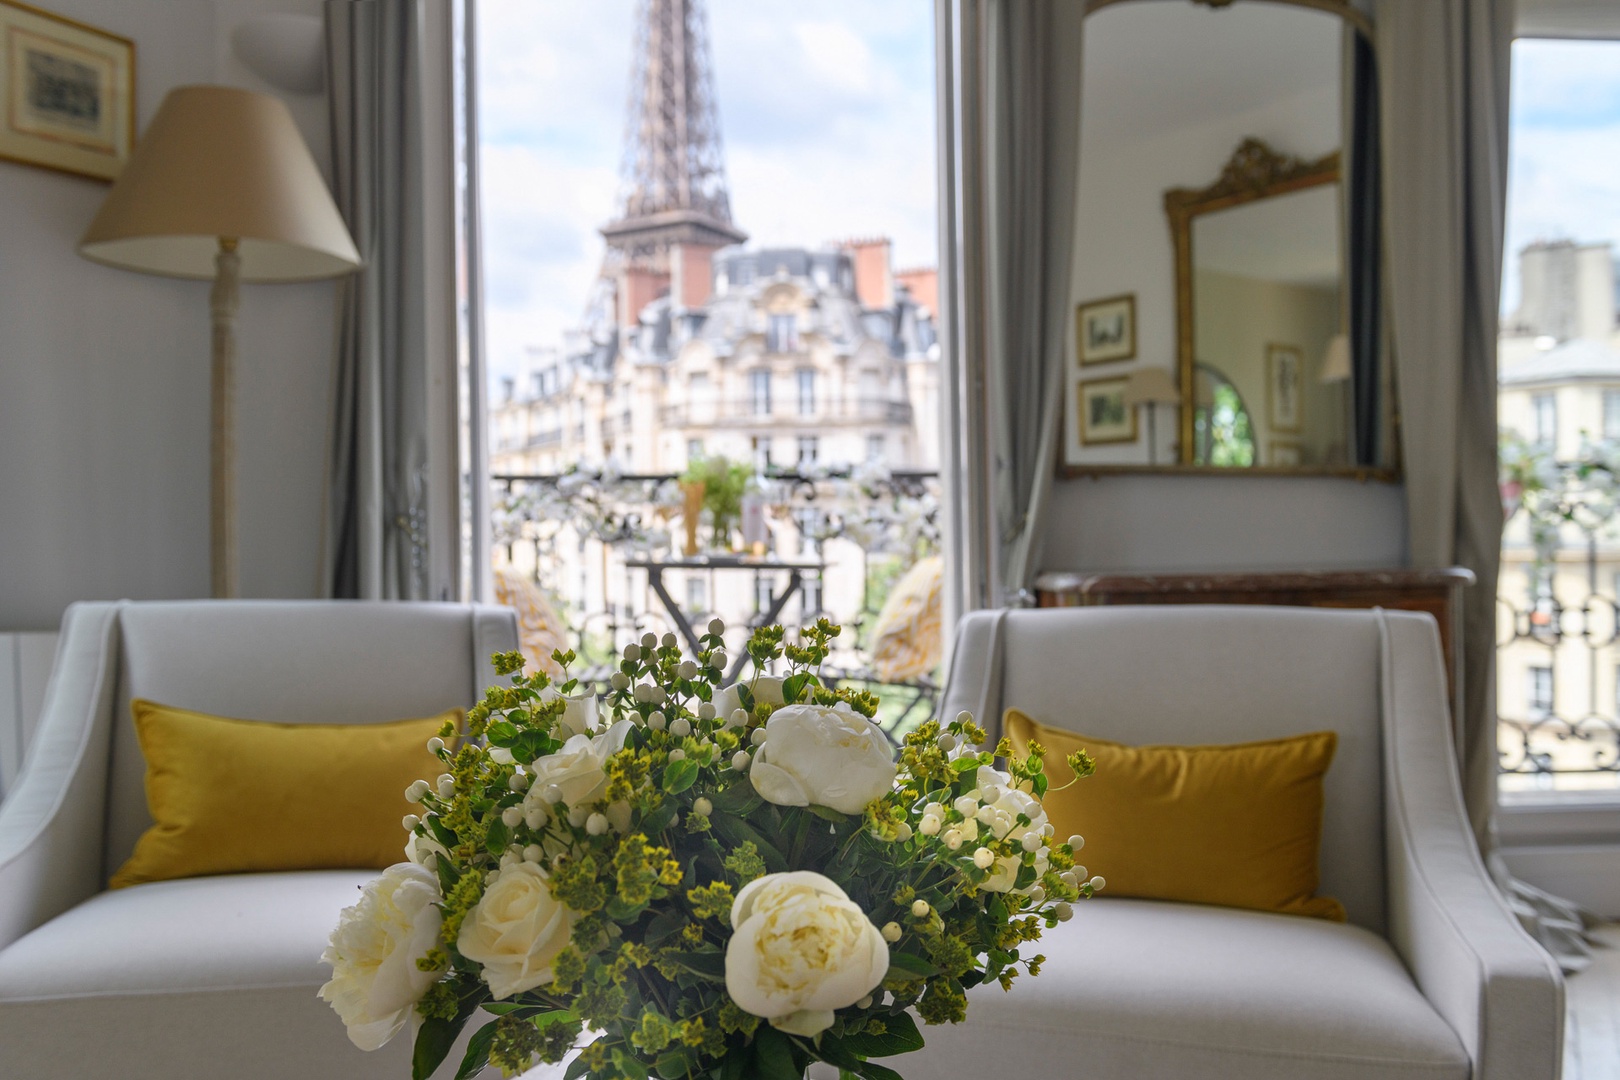 Welcome to the Champagne rental with stunning Eiffel Tower views!